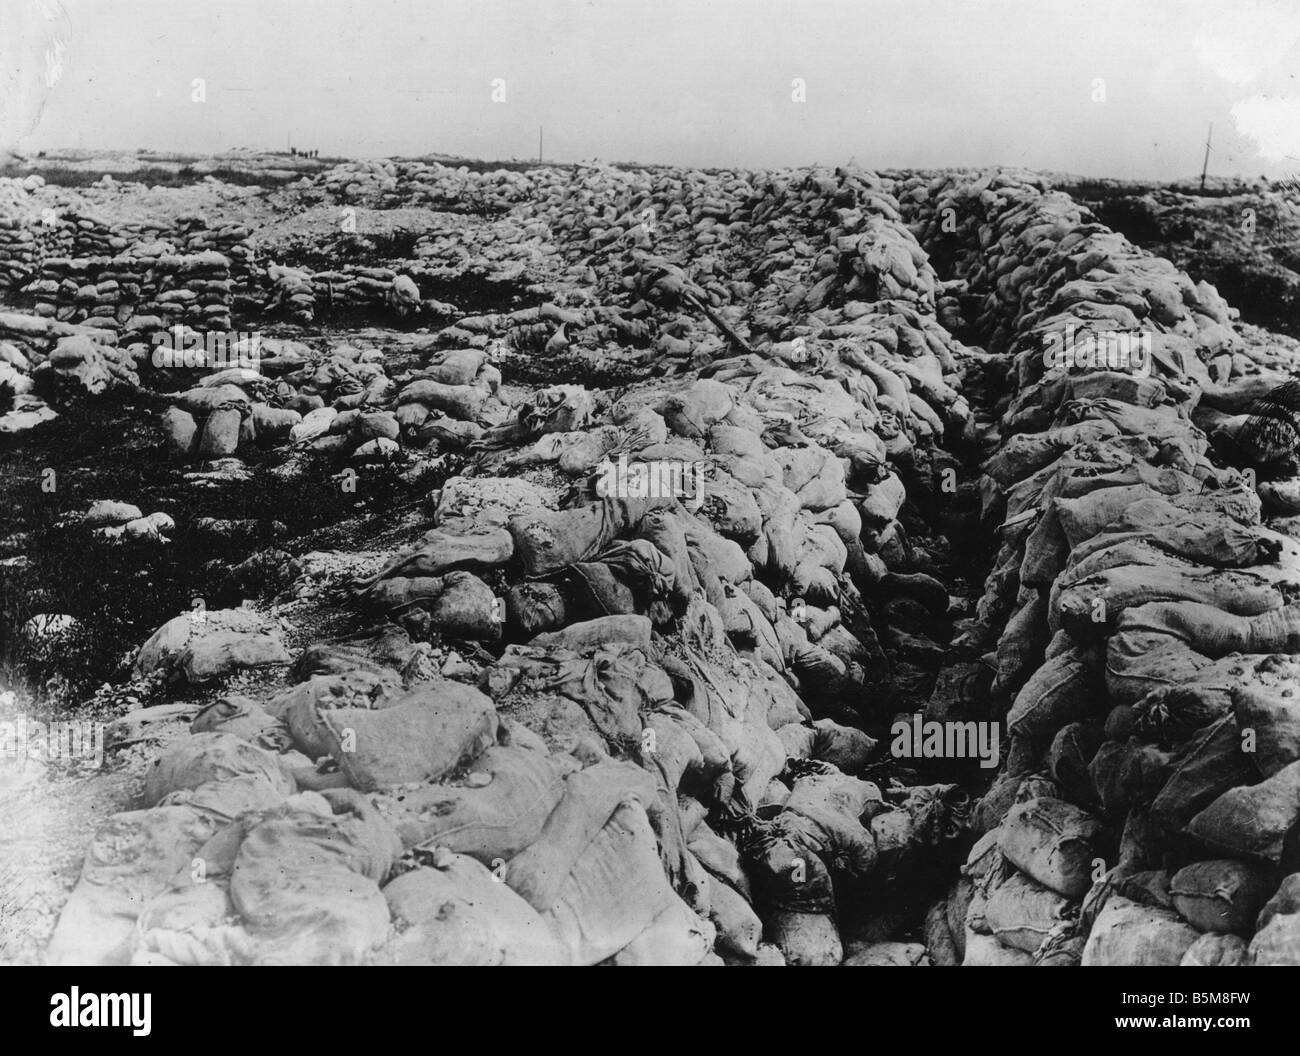 2 G55 F1 1917 22 WWI Static warfare Somme Sap History WWI France Battle of the Somme Sap Photo date unknown Stock Photo